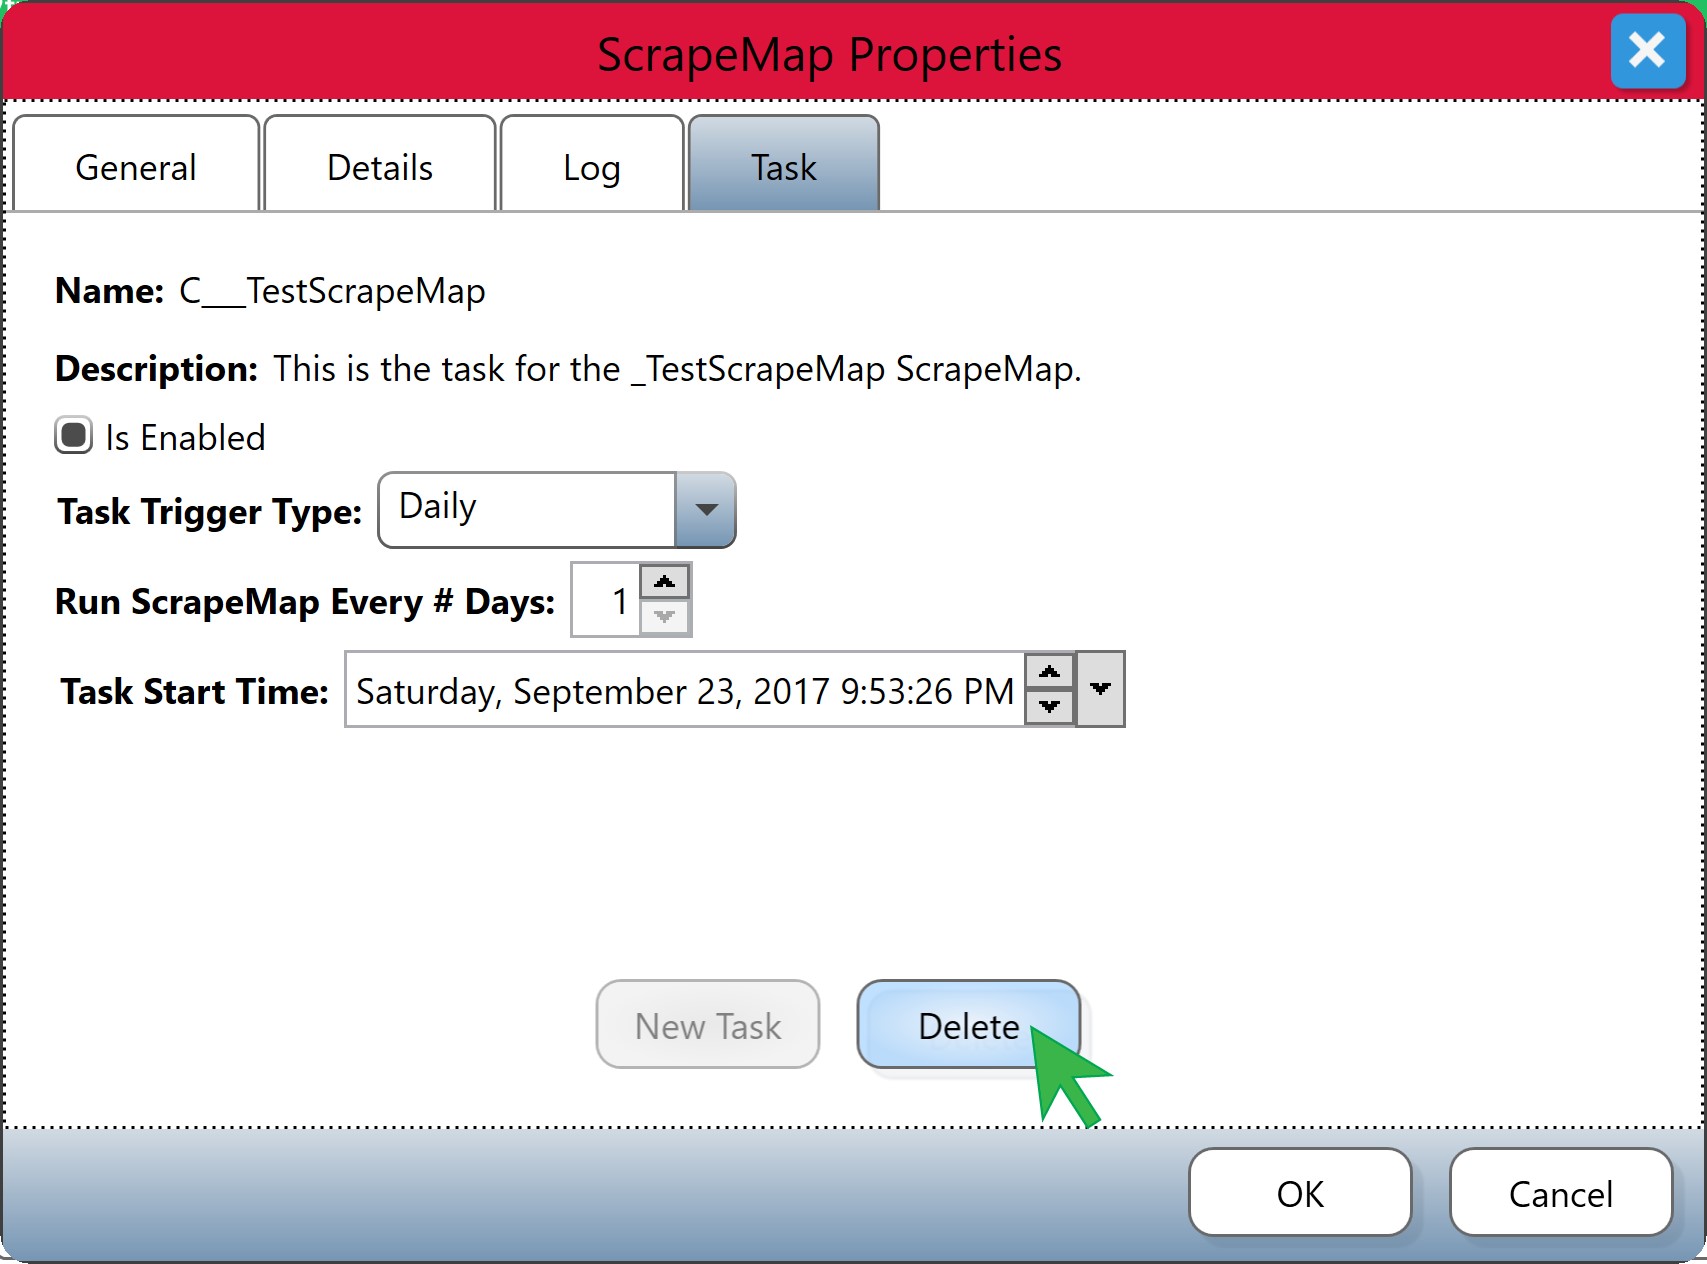 Task Tab of the ScrapeMap Properties Dialog with the Delete button selected